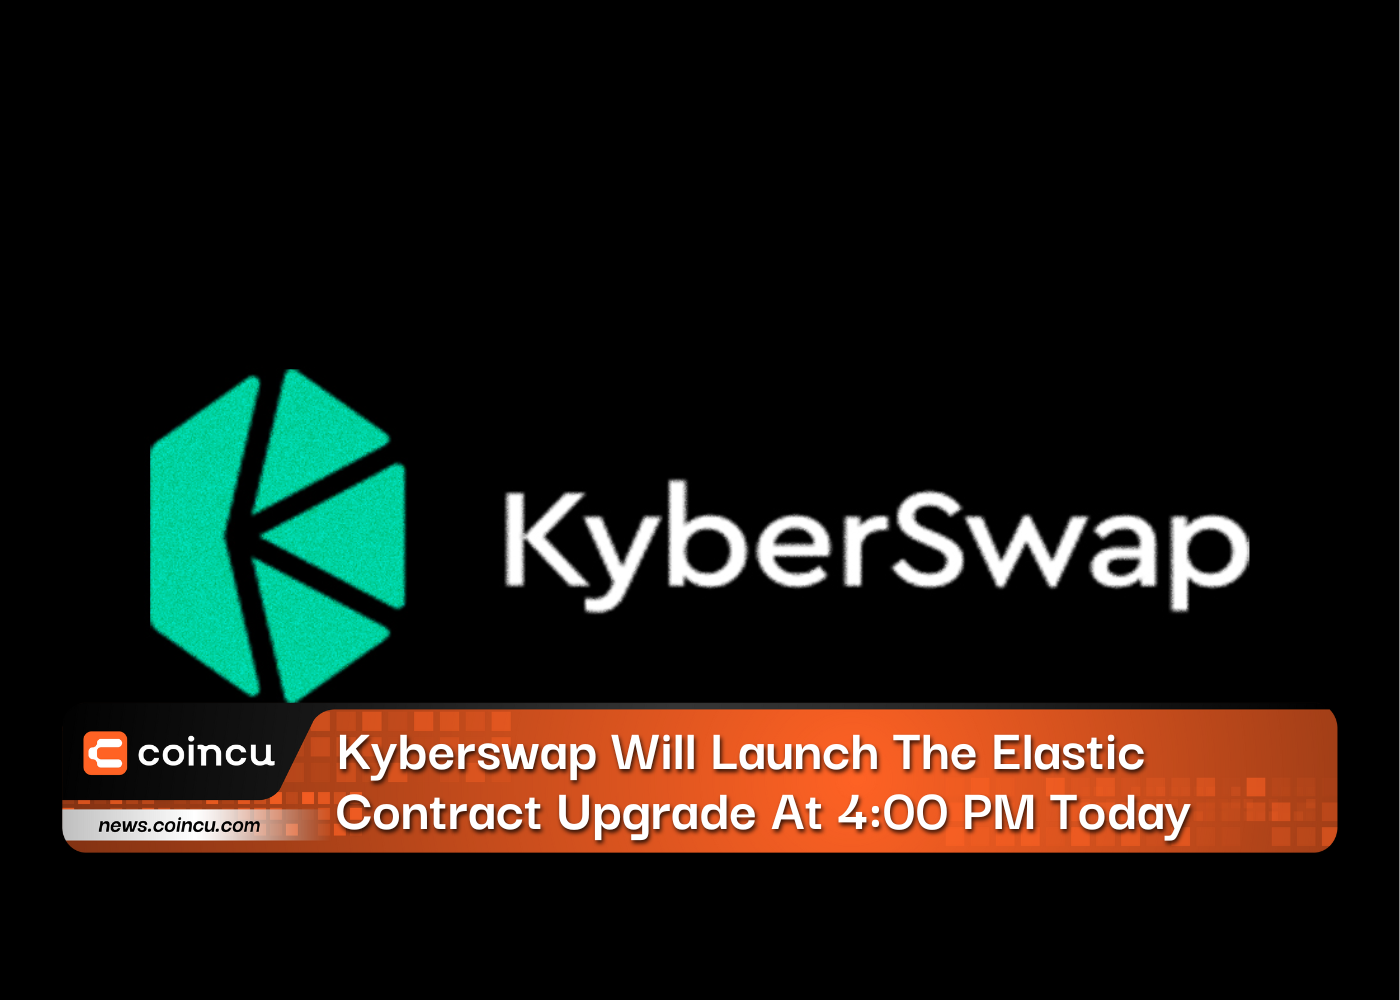 Kyberswap Will Launch The Elastic Contract Upgrade At 4:00 PM Today